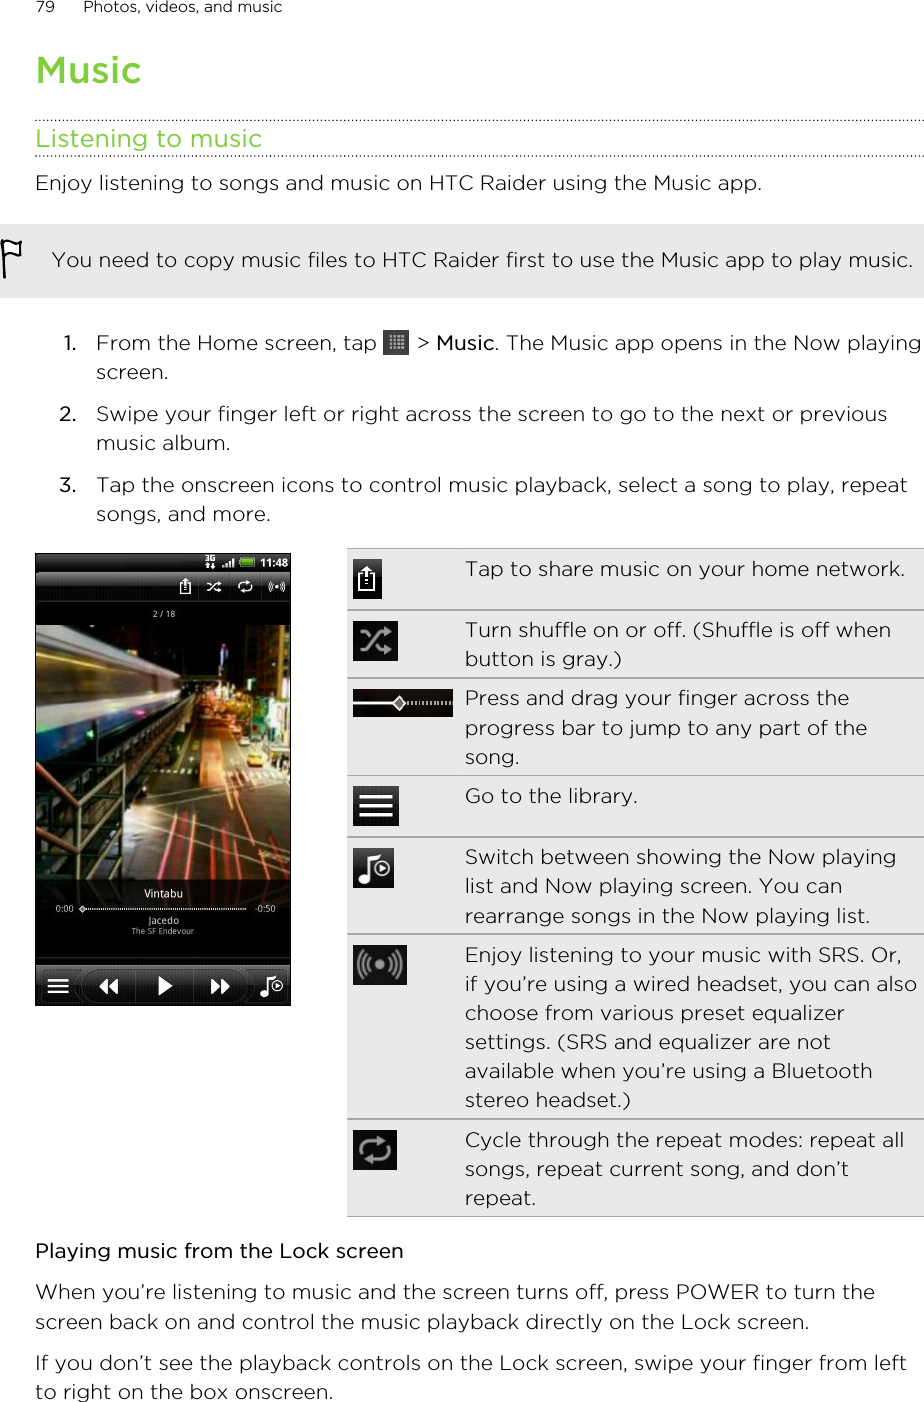 MusicListening to musicEnjoy listening to songs and music on HTC Raider using the Music app.You need to copy music files to HTC Raider first to use the Music app to play music.1. From the Home screen, tap   &gt; Music. The Music app opens in the Now playingscreen.2. Swipe your finger left or right across the screen to go to the next or previousmusic album.3. Tap the onscreen icons to control music playback, select a song to play, repeatsongs, and more.Tap to share music on your home network.Turn shuffle on or off. (Shuffle is off whenbutton is gray.)Press and drag your finger across theprogress bar to jump to any part of thesong.Go to the library.Switch between showing the Now playinglist and Now playing screen. You canrearrange songs in the Now playing list.Enjoy listening to your music with SRS. Or,if you’re using a wired headset, you can alsochoose from various preset equalizersettings. (SRS and equalizer are notavailable when you’re using a Bluetoothstereo headset.)Cycle through the repeat modes: repeat allsongs, repeat current song, and don’trepeat.Playing music from the Lock screenWhen you’re listening to music and the screen turns off, press POWER to turn thescreen back on and control the music playback directly on the Lock screen.If you don’t see the playback controls on the Lock screen, swipe your finger from leftto right on the box onscreen.79 Photos, videos, and music